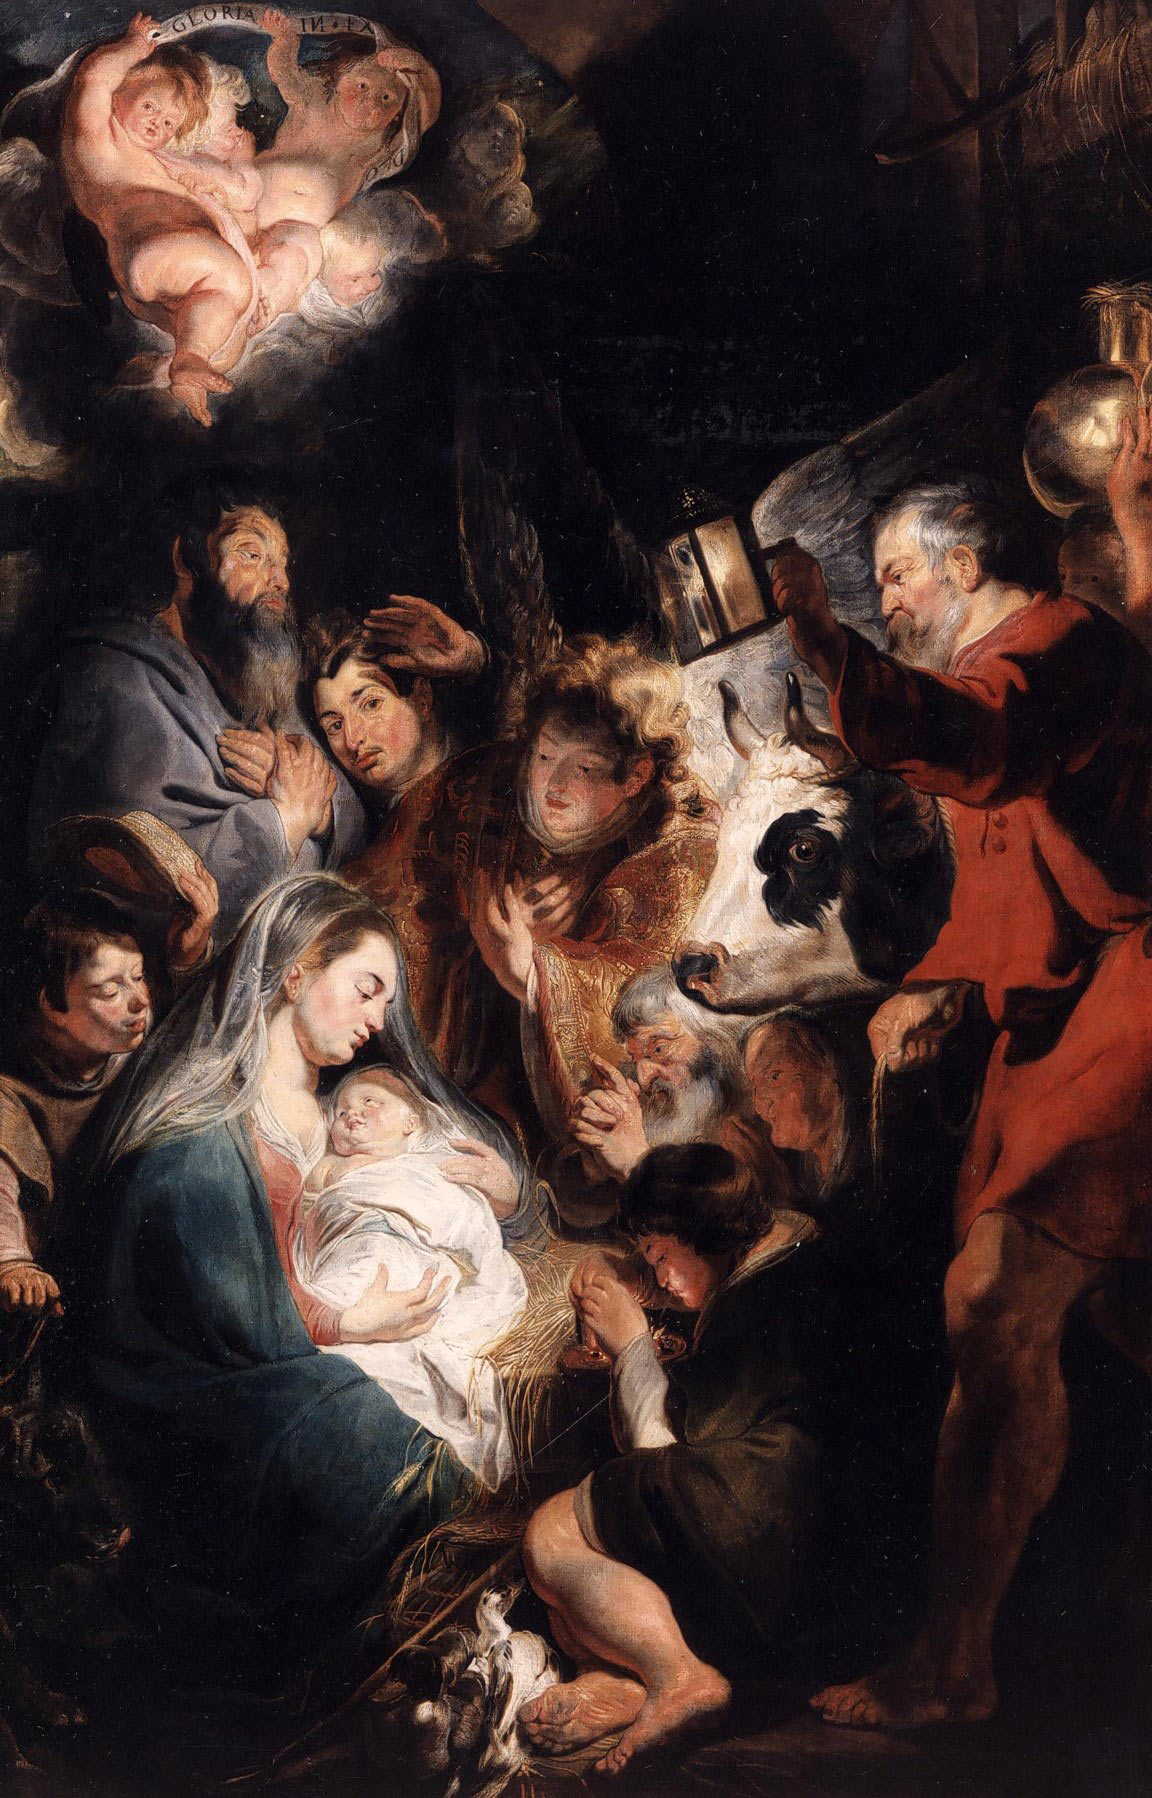 The adoration of the shepherds is the scene depicted in the thirth cantata of the Weihnachtsoratorium, so I am honoured to present to you the adoration by Jacob Jordaens (1593-1678), a painter of my hometown of Antwerp, a contemporary of Rubens and Van Dyck. This painting hangs in a museum in Grenoble since it was robbed in 1794 by the French who occupied my country at the time. It is one of at least 173 outstanding works of art they took.